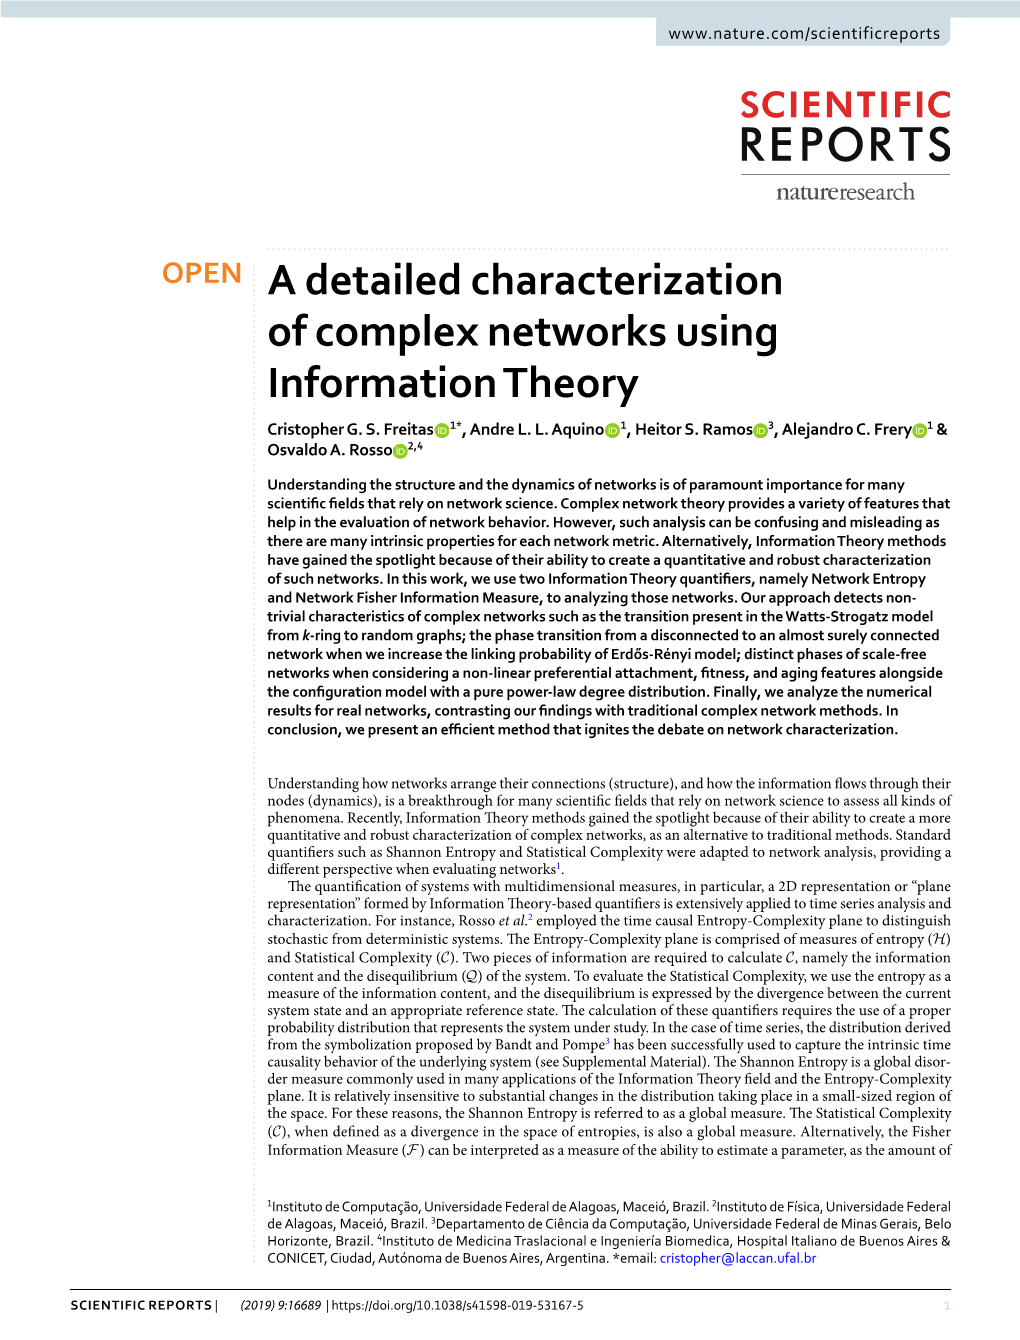 A Detailed Characterization of Complex Networks Using Information Theory Cristopher G